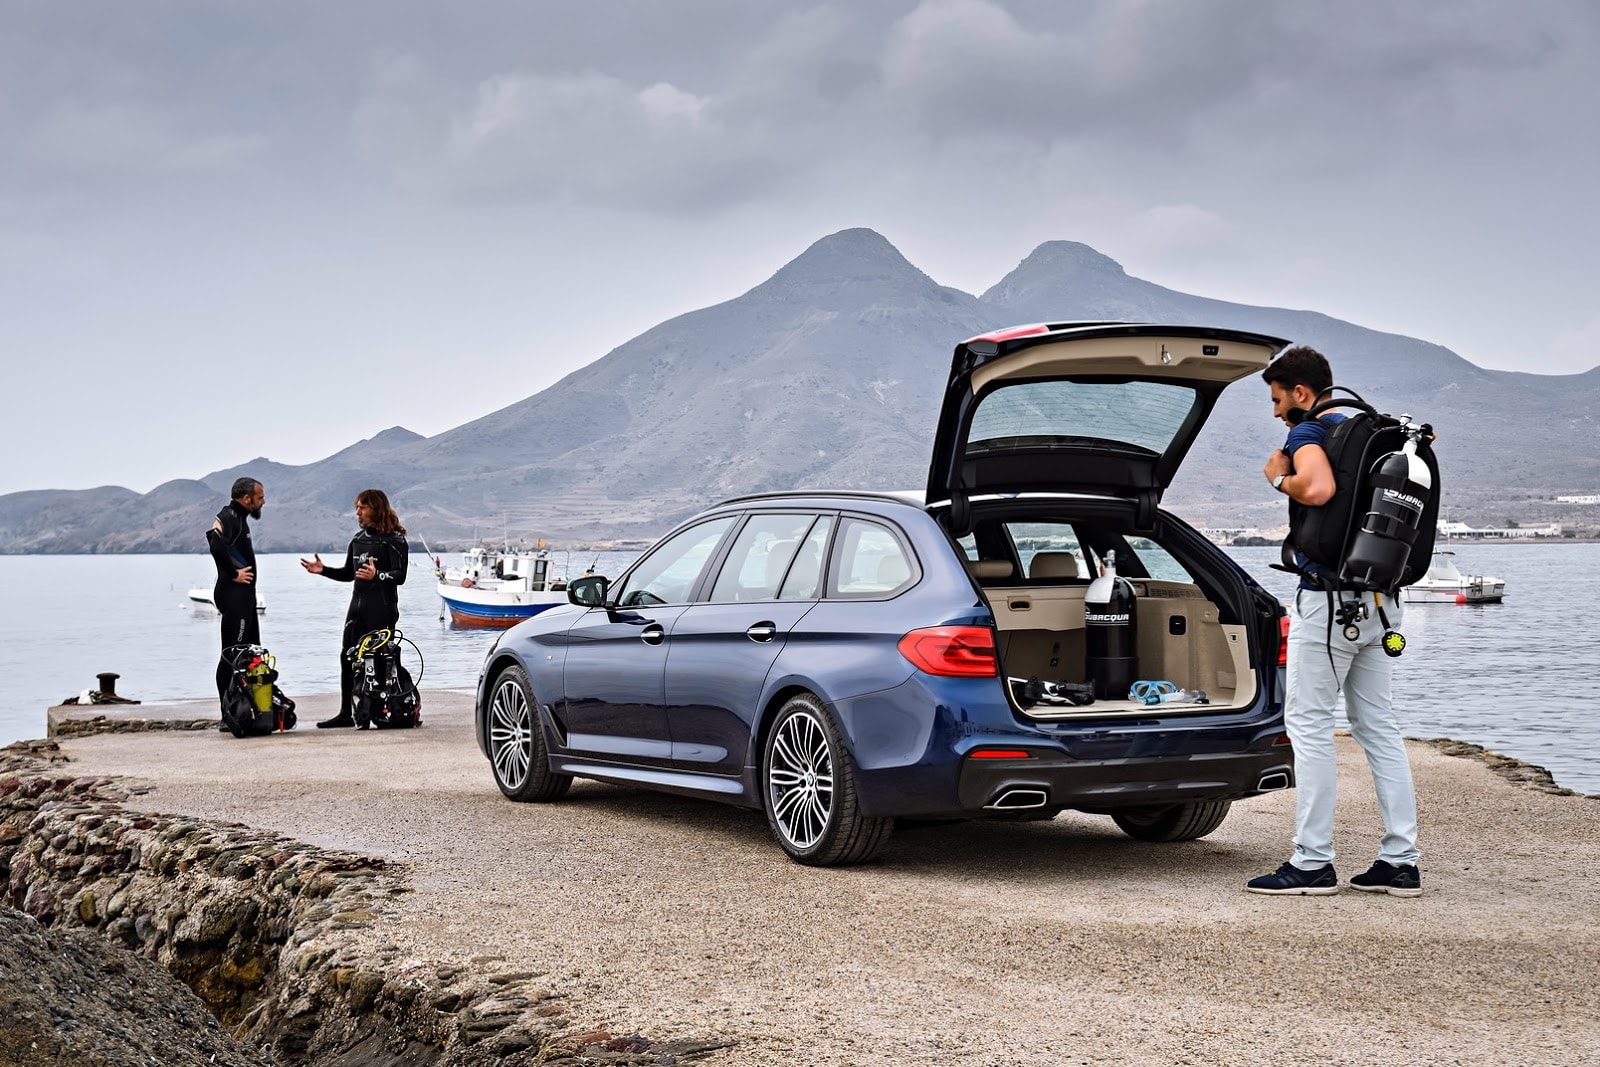 G31 BMW 5 Series Touring unveiled - 1,700-litre boot 